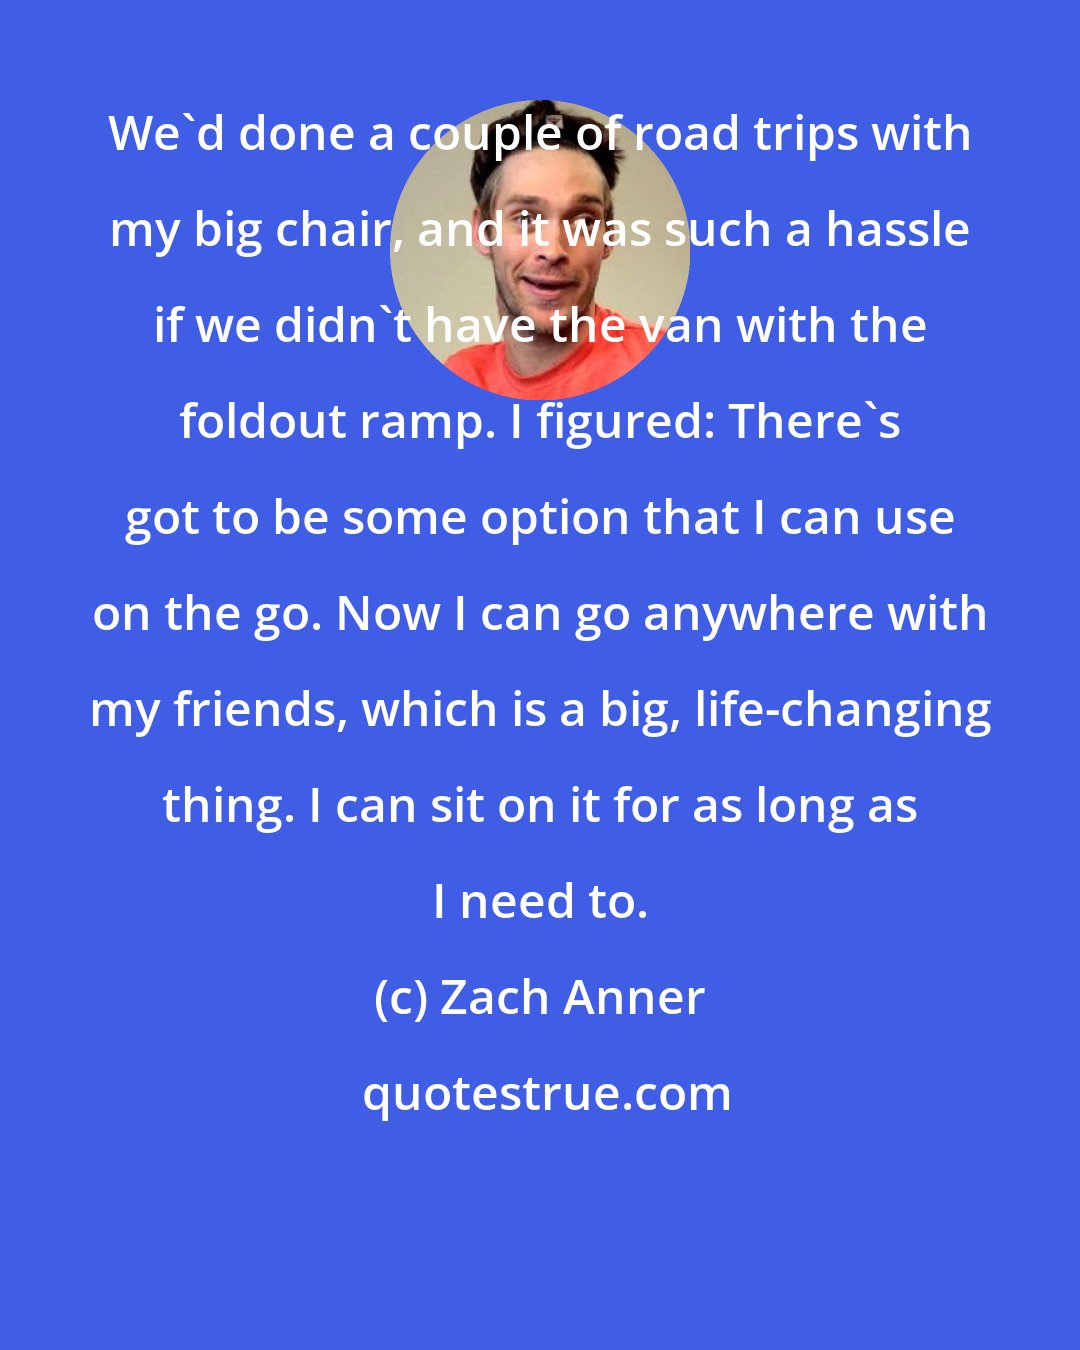 Zach Anner: We'd done a couple of road trips with my big chair, and it was such a hassle if we didn't have the van with the foldout ramp. I figured: There's got to be some option that I can use on the go. Now I can go anywhere with my friends, which is a big, life-changing thing. I can sit on it for as long as I need to.